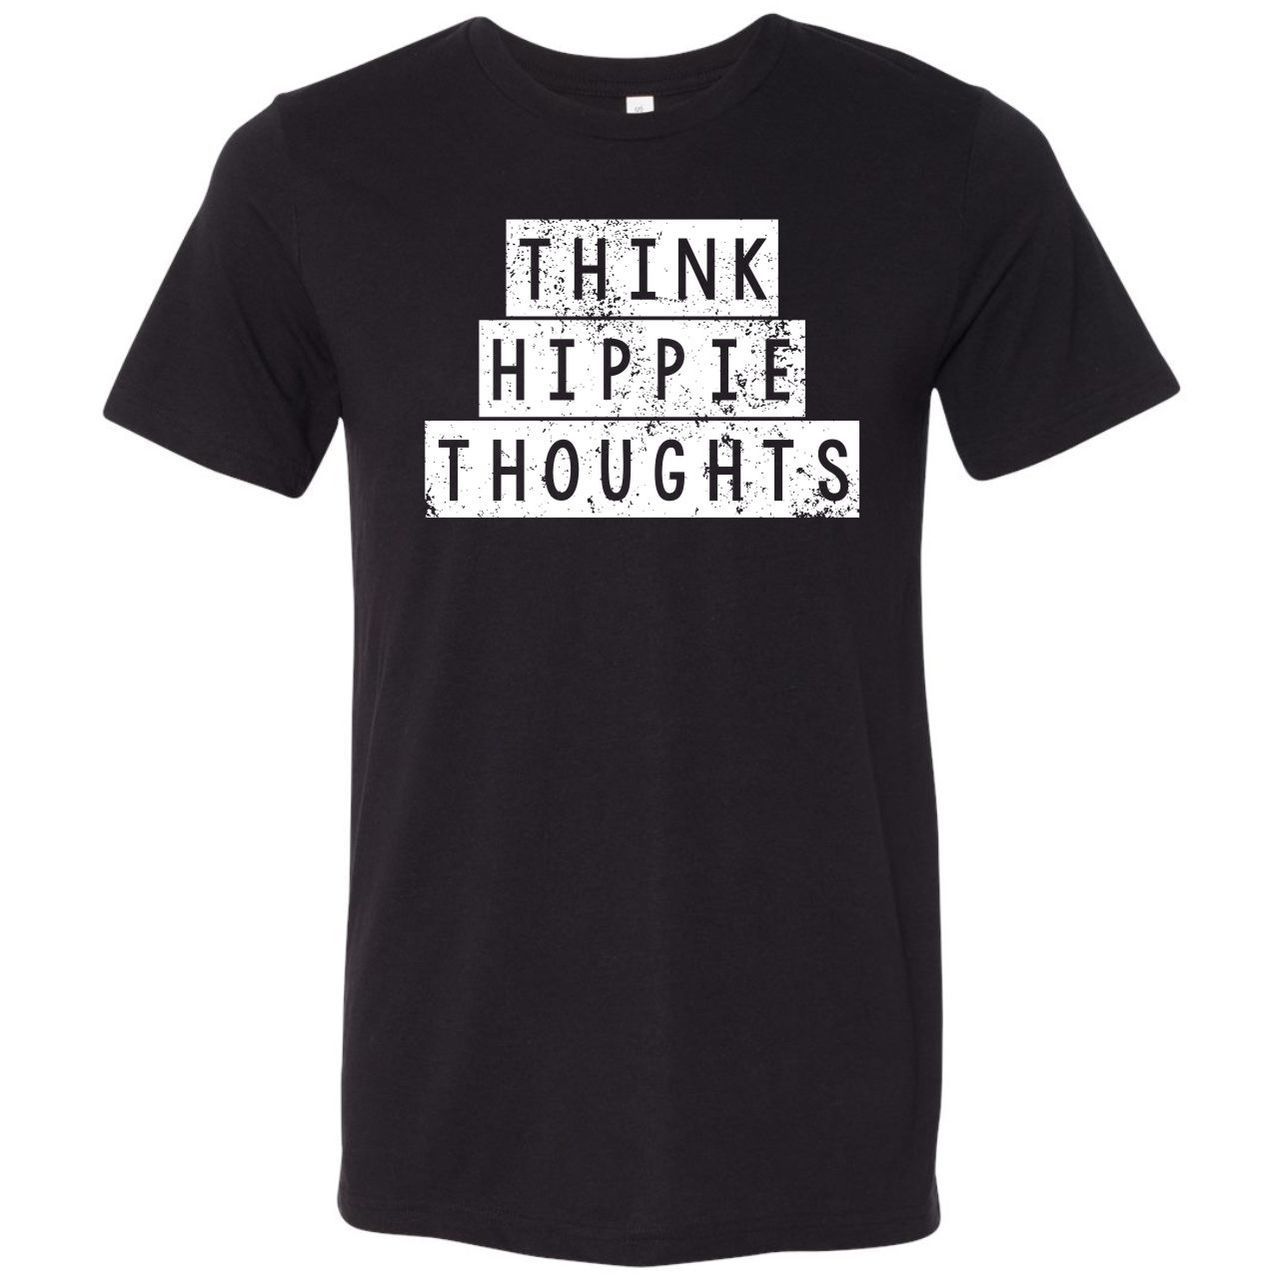 *WHOLESALE* Think Hippie Thoughts - Unisex Tee - The Graphic Tee